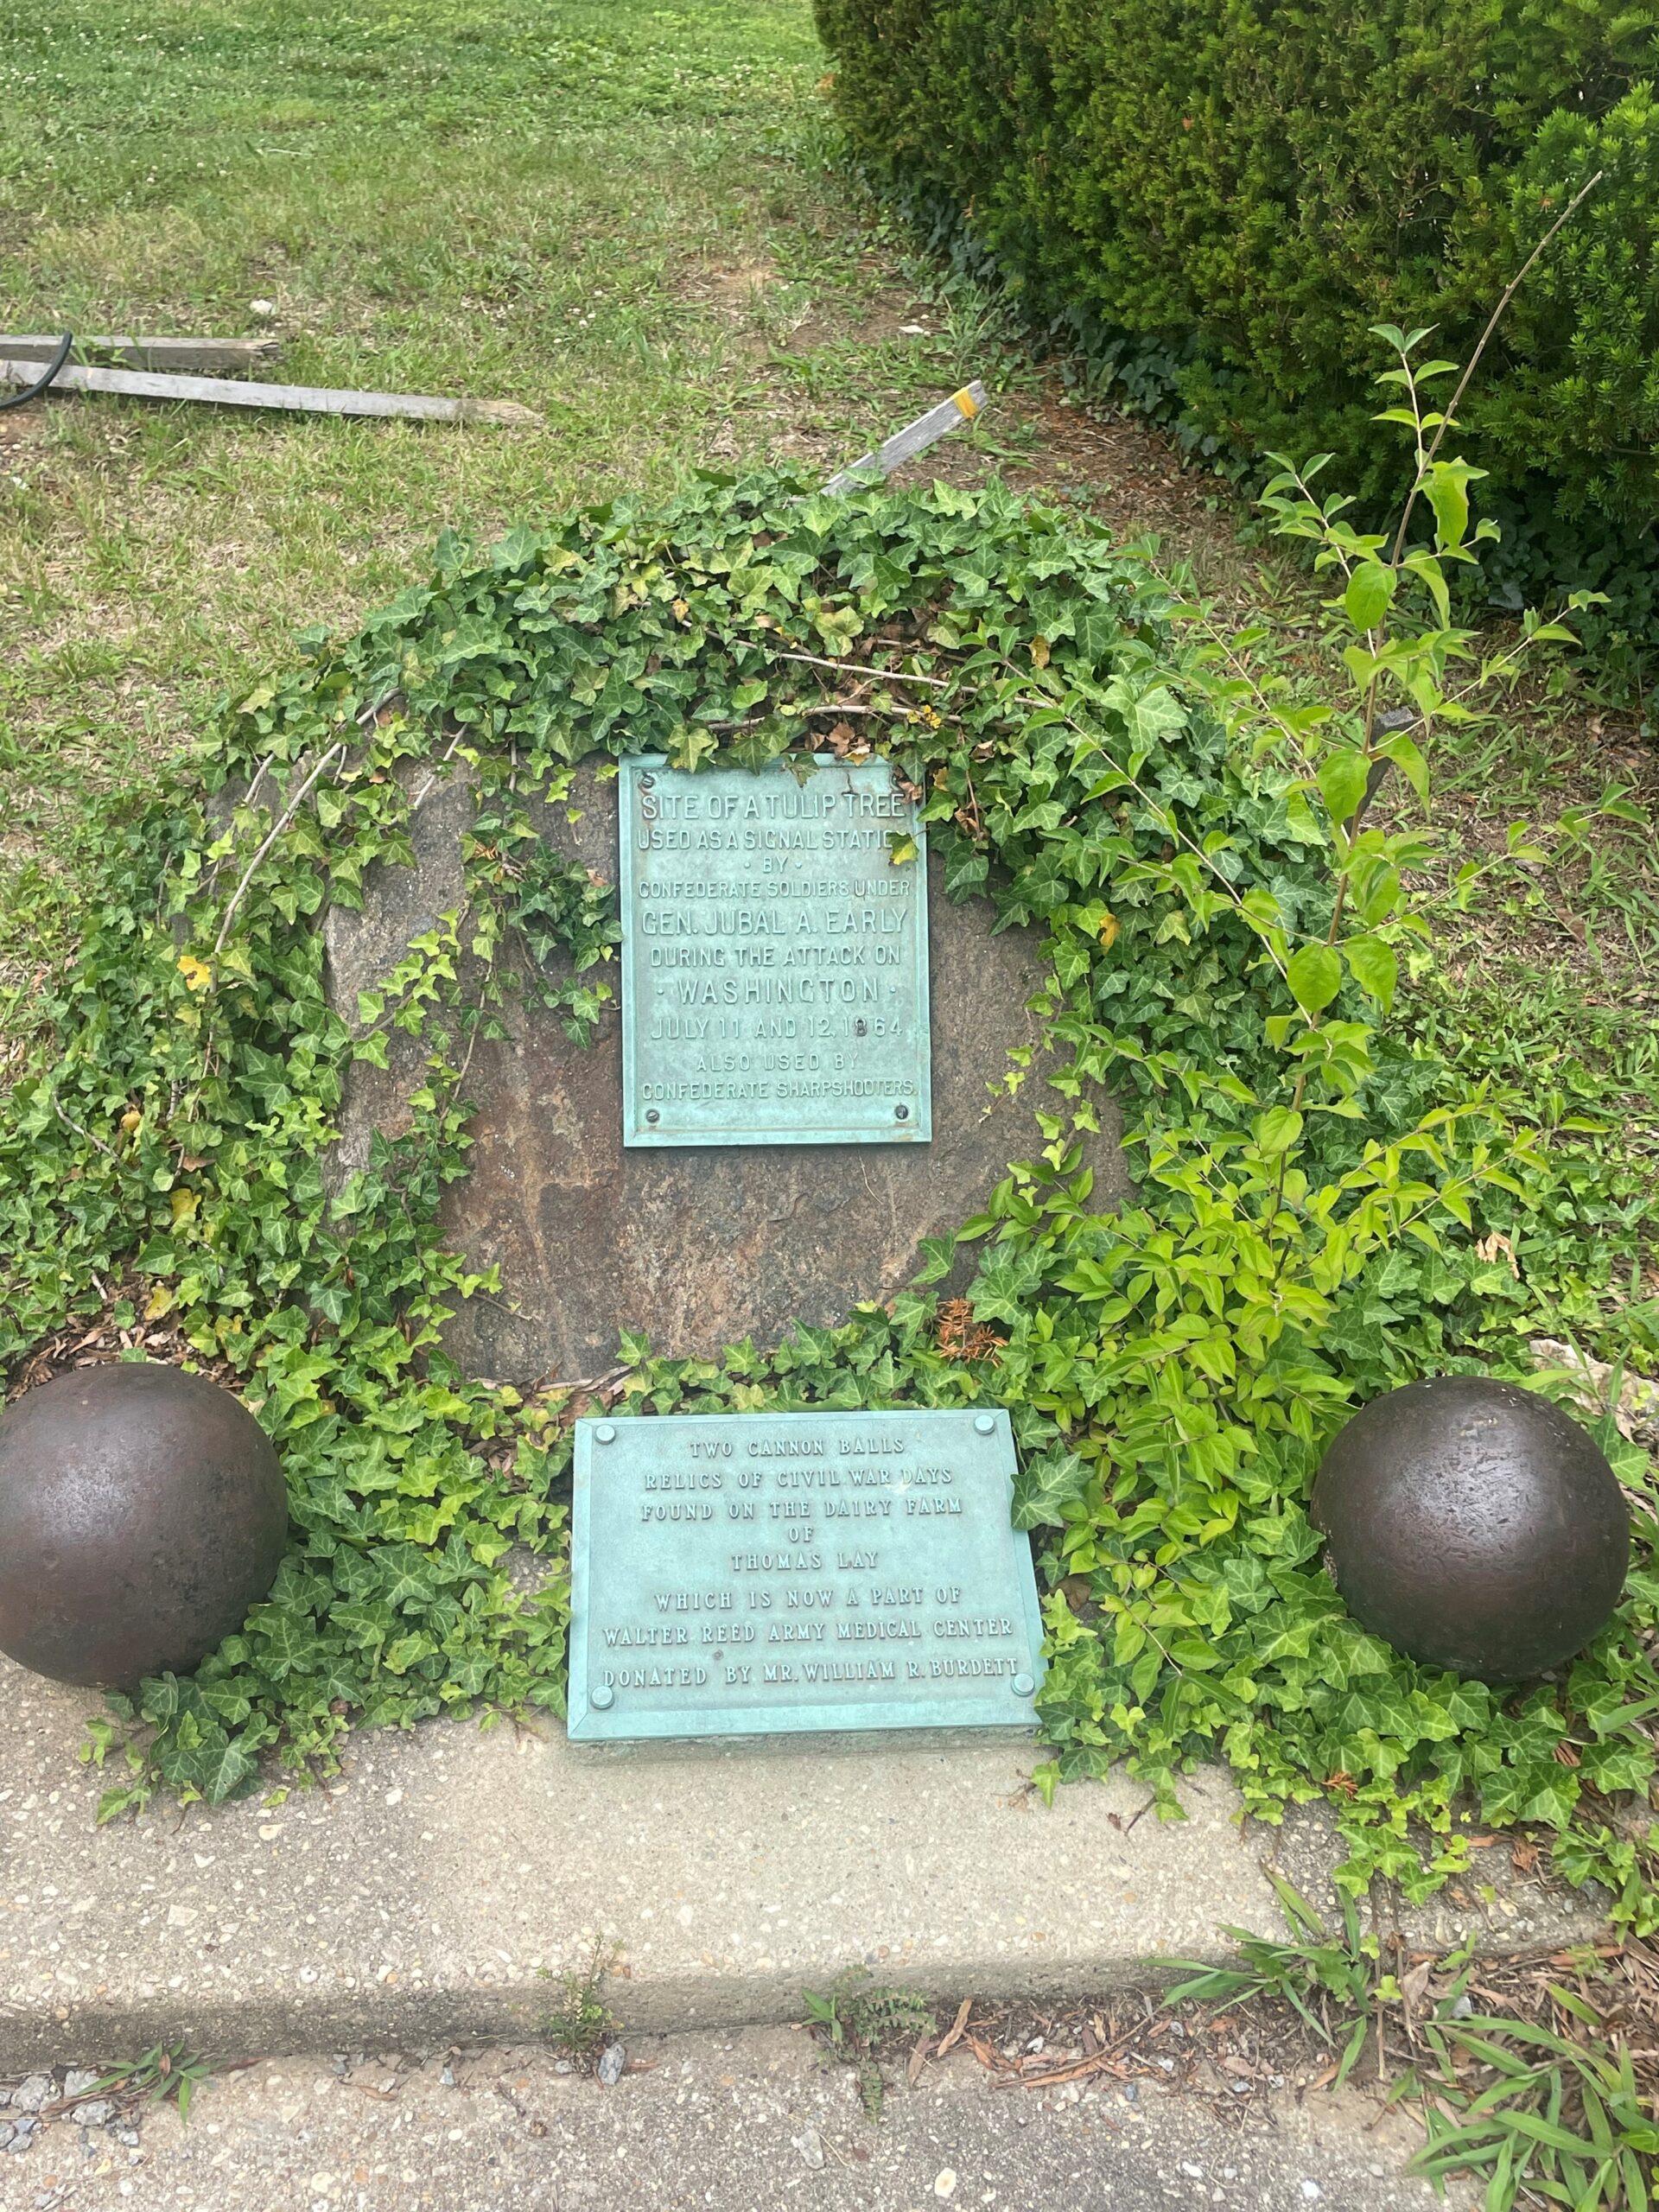 cannonball plaque re: the battle of Fort Stevens